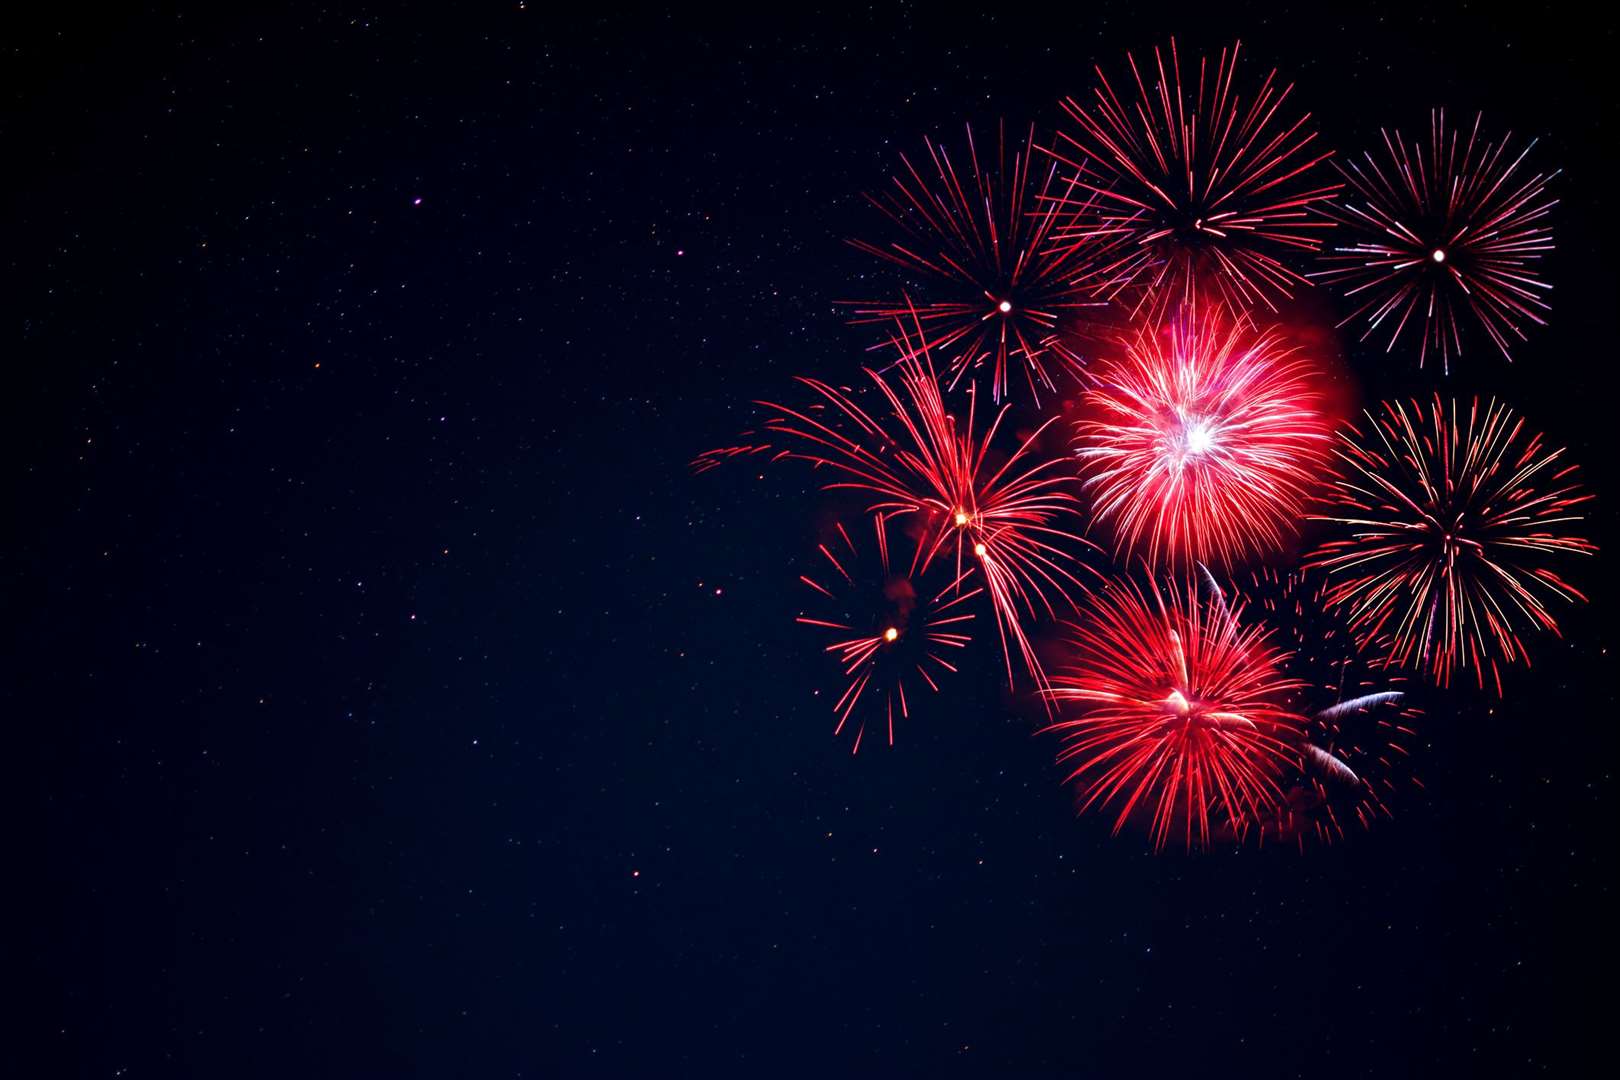 There are fireworks displays taking place this weekend following Tuesday's Bonfire Night